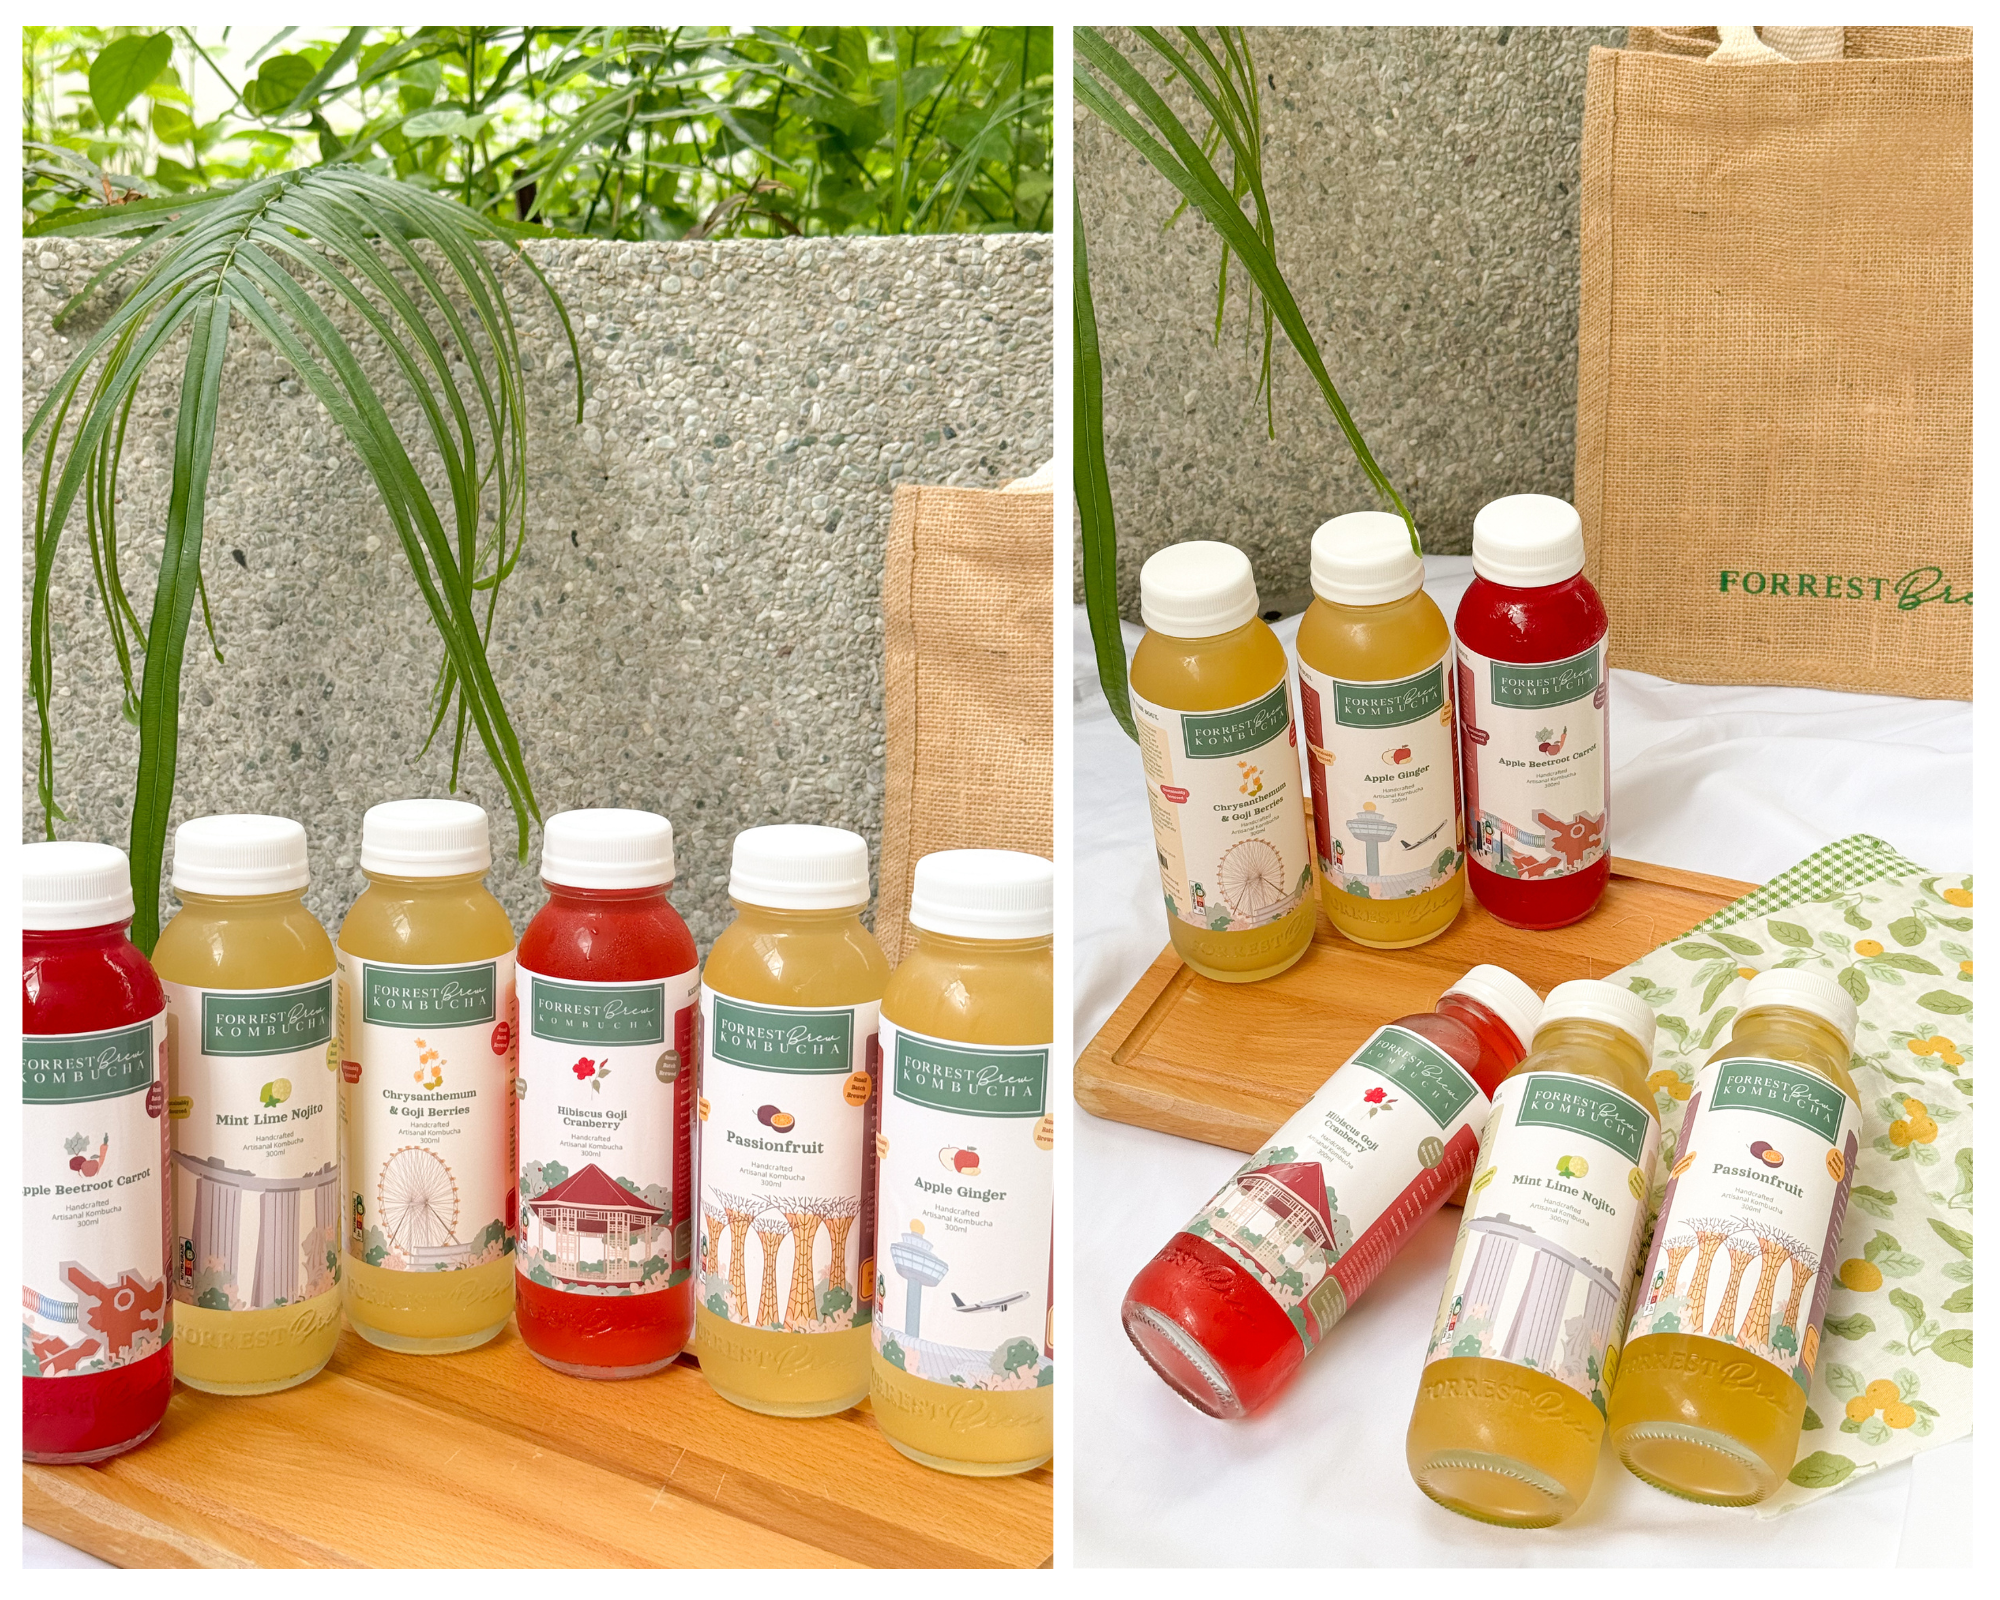 Mark Singapore's 59th Birthday with the SG Collection: 5+1 Kombucha Pack!